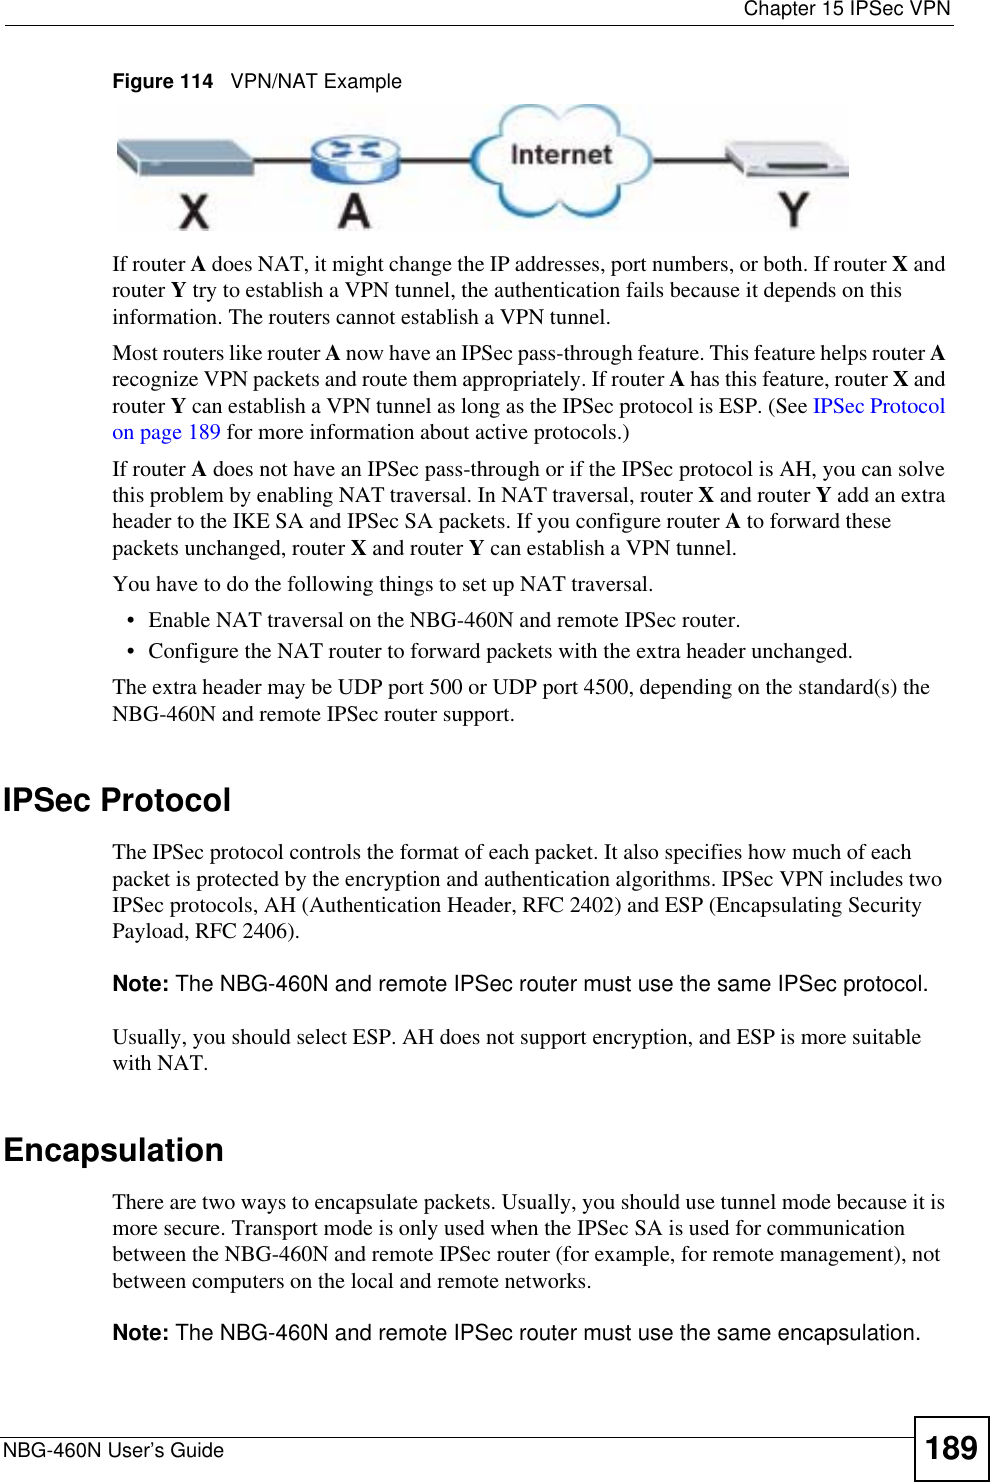  Chapter 15 IPSec VPNNBG-460N User’s Guide 189Figure 114   VPN/NAT ExampleIf router A does NAT, it might change the IP addresses, port numbers, or both. If router X and router Y try to establish a VPN tunnel, the authentication fails because it depends on this information. The routers cannot establish a VPN tunnel.Most routers like router A now have an IPSec pass-through feature. This feature helps router Arecognize VPN packets and route them appropriately. If router A has this feature, router X and router Y can establish a VPN tunnel as long as the IPSec protocol is ESP. (See IPSec Protocol on page 189 for more information about active protocols.)If router A does not have an IPSec pass-through or if the IPSec protocol is AH, you can solve this problem by enabling NAT traversal. In NAT traversal, router X and router Y add an extra header to the IKE SA and IPSec SA packets. If you configure router A to forward these packets unchanged, router X and router Y can establish a VPN tunnel.You have to do the following things to set up NAT traversal.• Enable NAT traversal on the NBG-460N and remote IPSec router.• Configure the NAT router to forward packets with the extra header unchanged. The extra header may be UDP port 500 or UDP port 4500, depending on the standard(s) the NBG-460N and remote IPSec router support.IPSec ProtocolThe IPSec protocol controls the format of each packet. It also specifies how much of each packet is protected by the encryption and authentication algorithms. IPSec VPN includes two IPSec protocols, AH (Authentication Header, RFC 2402) and ESP (Encapsulating Security Payload, RFC 2406).Note: The NBG-460N and remote IPSec router must use the same IPSec protocol.Usually, you should select ESP. AH does not support encryption, and ESP is more suitable with NAT.EncapsulationThere are two ways to encapsulate packets. Usually, you should use tunnel mode because it is more secure. Transport mode is only used when the IPSec SA is used for communication between the NBG-460N and remote IPSec router (for example, for remote management), not between computers on the local and remote networks.Note: The NBG-460N and remote IPSec router must use the same encapsulation.